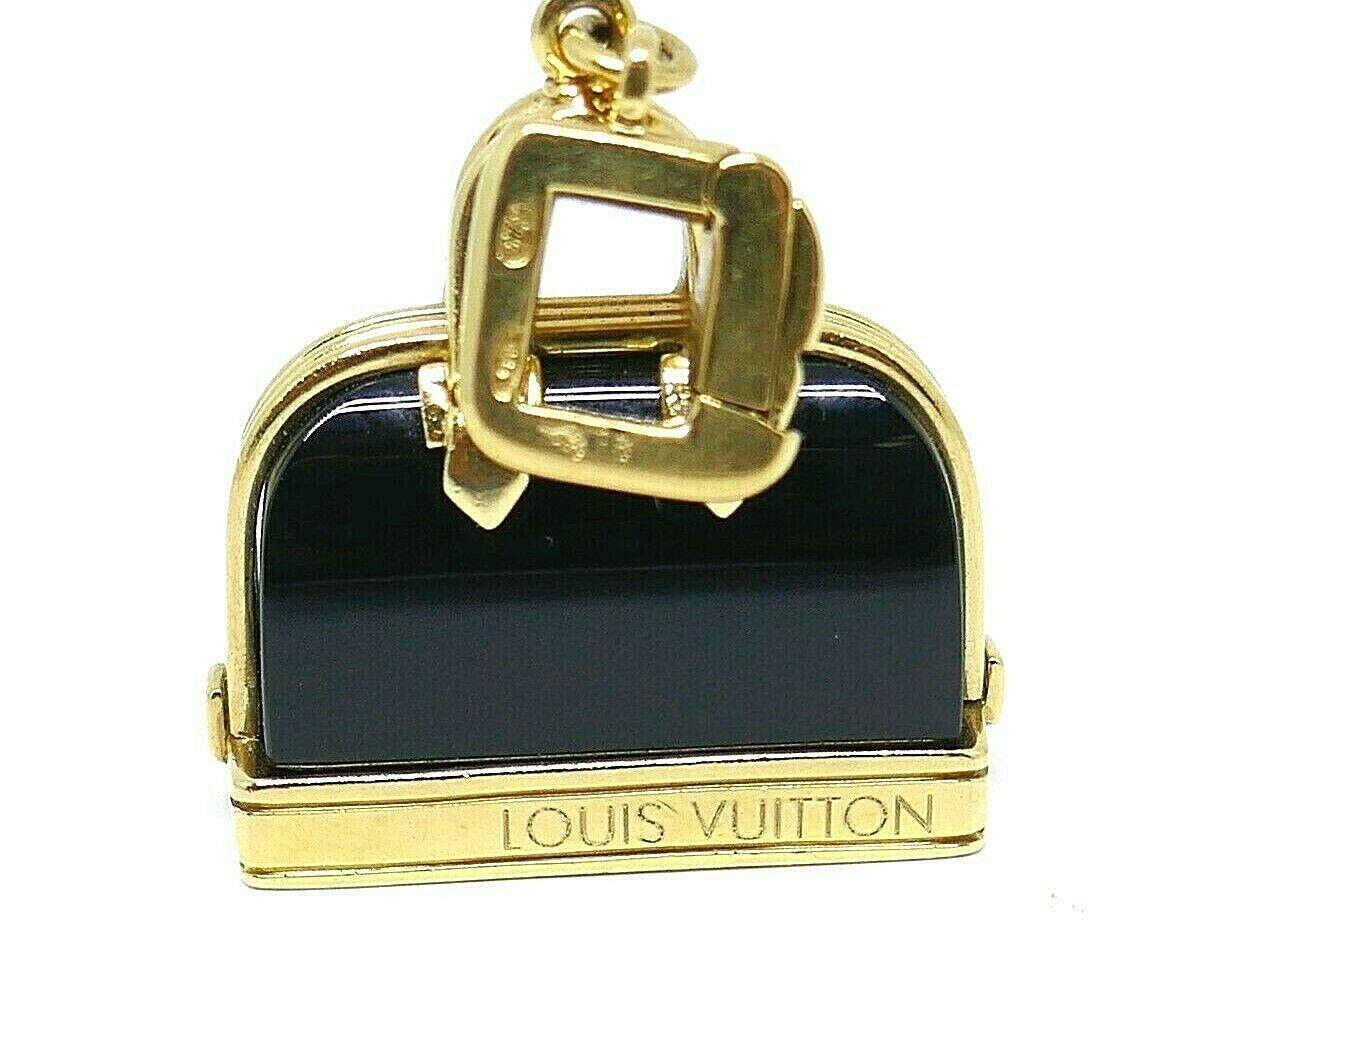 Beautiful charm made of onyx and 18k yellow gold by Louis Vuitton. Features an opening/closing clasp stamped with the Louis Vuitton maker's mark, hallmark for 18k gold. French marks and a serial number. 
Measurements: 1 1/2